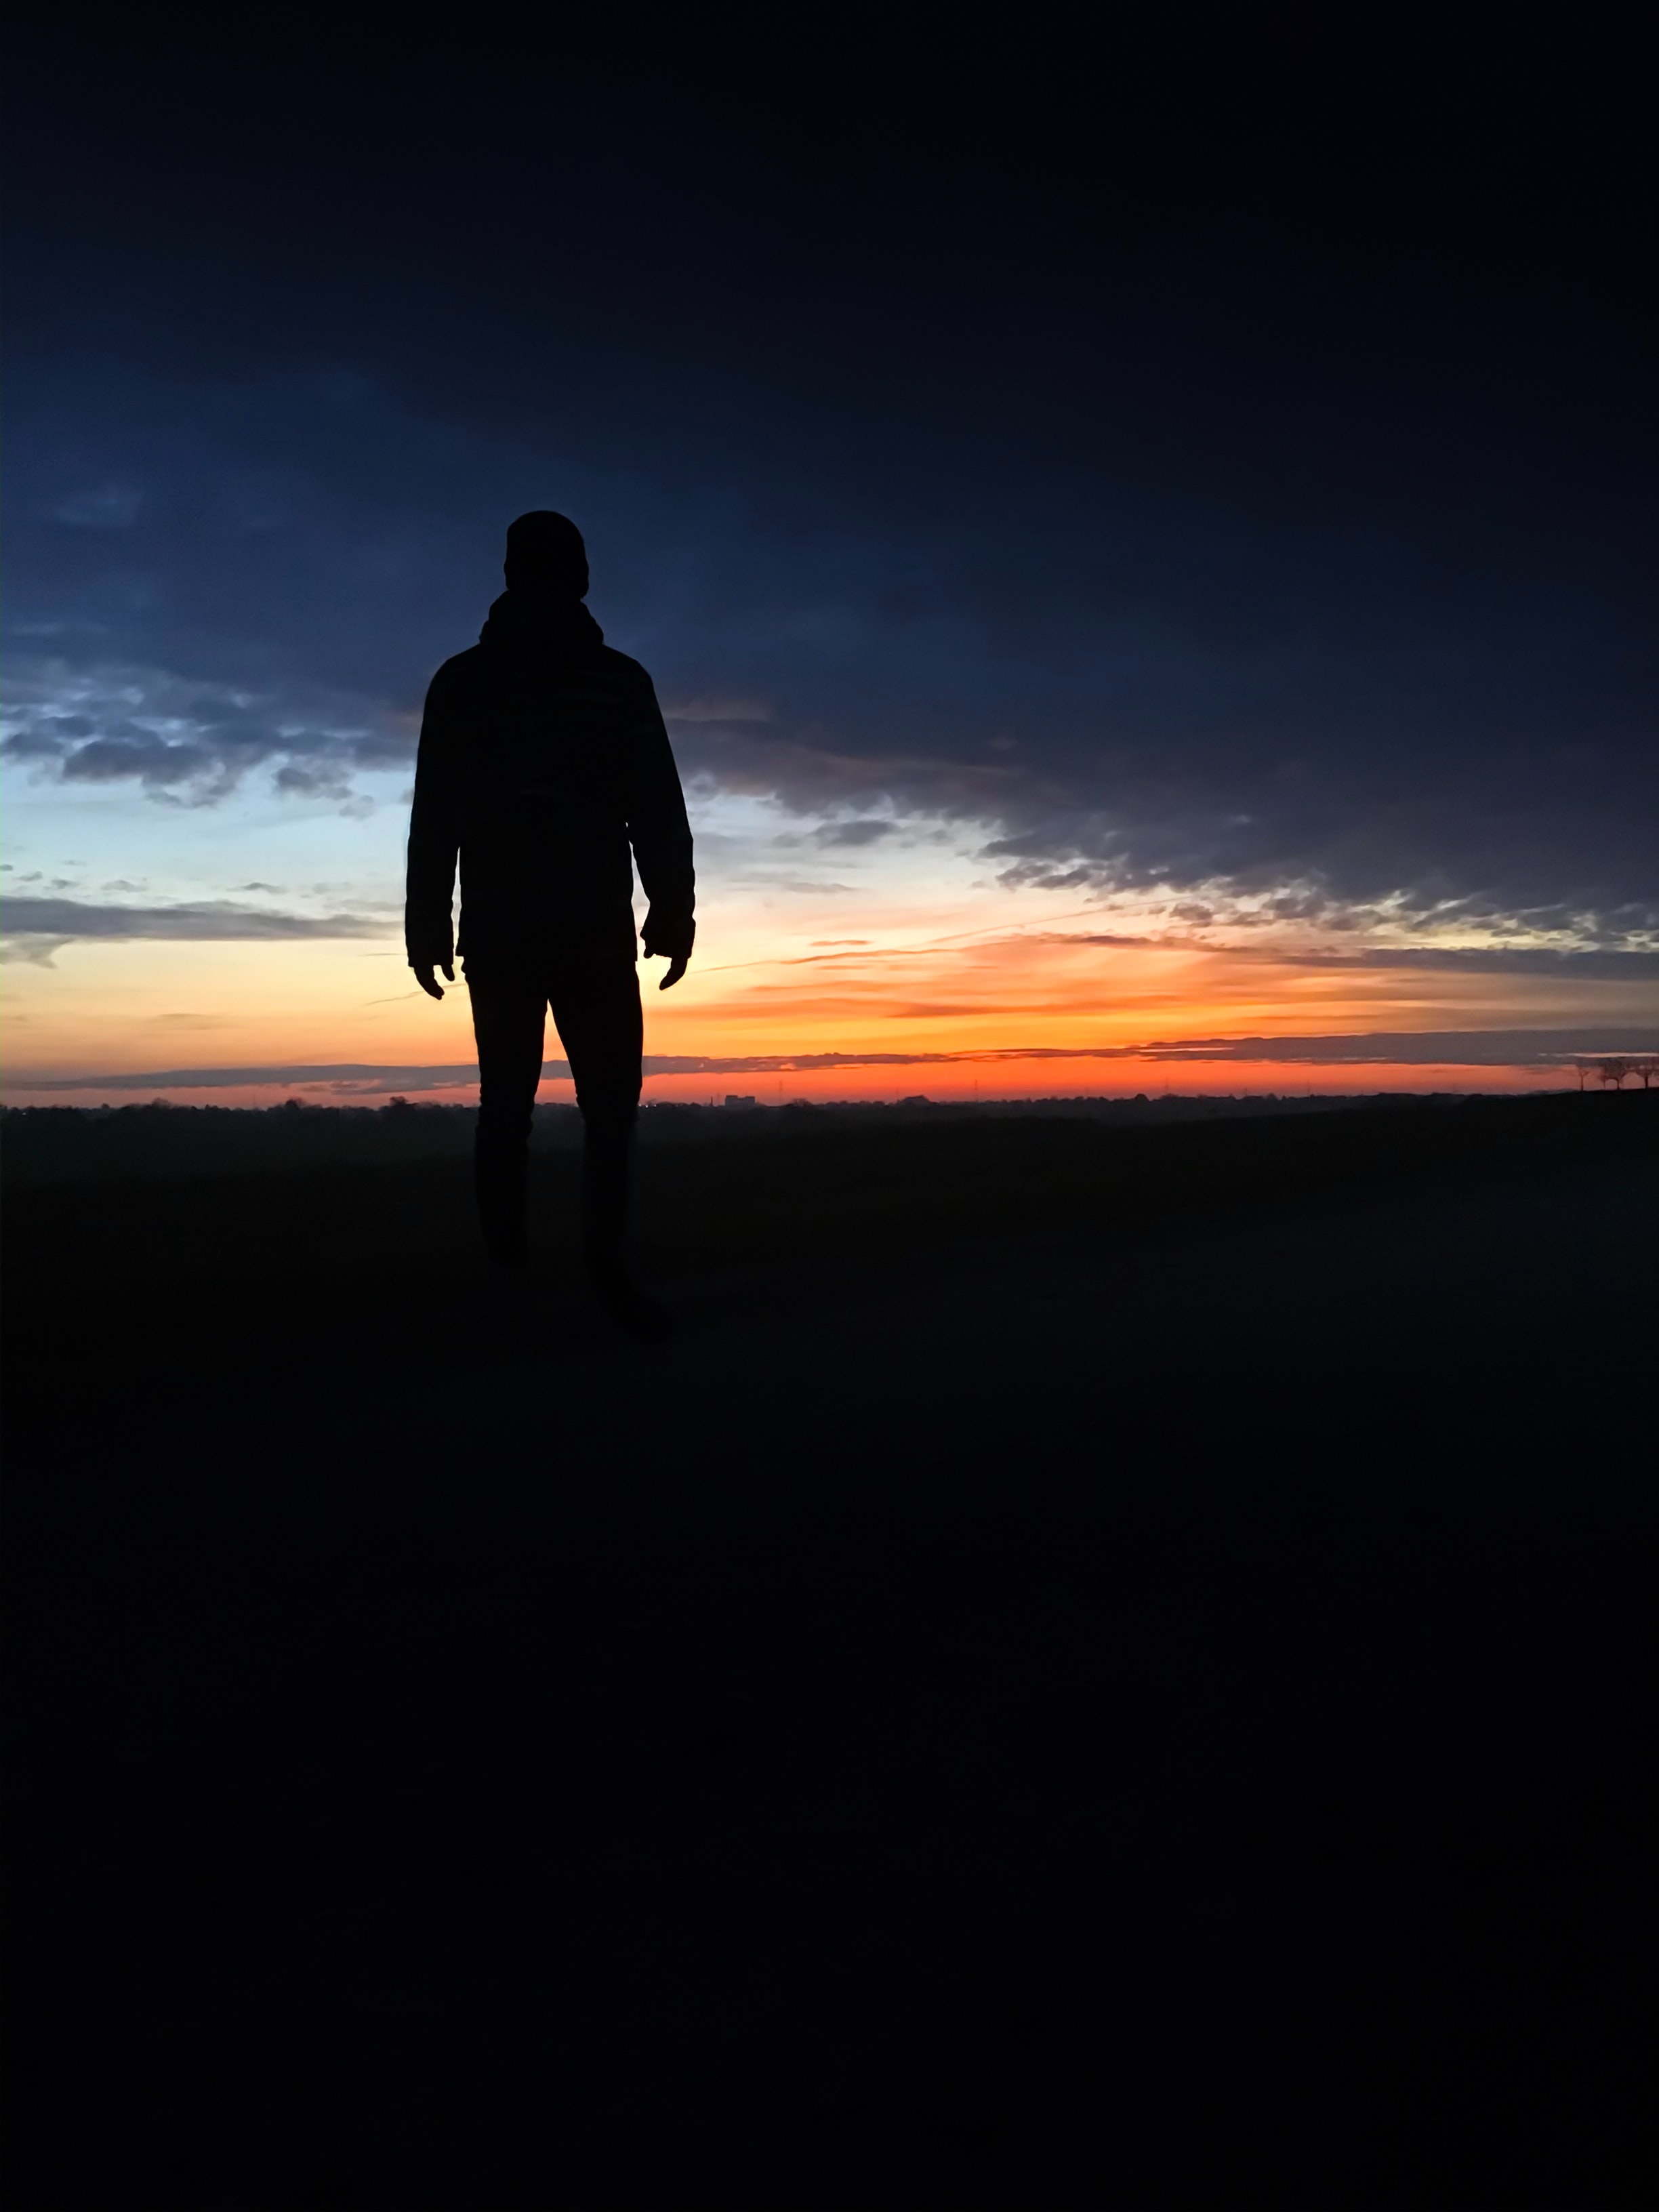 silhouette, human, alone, loneliness, lonely, sunset, dark, person